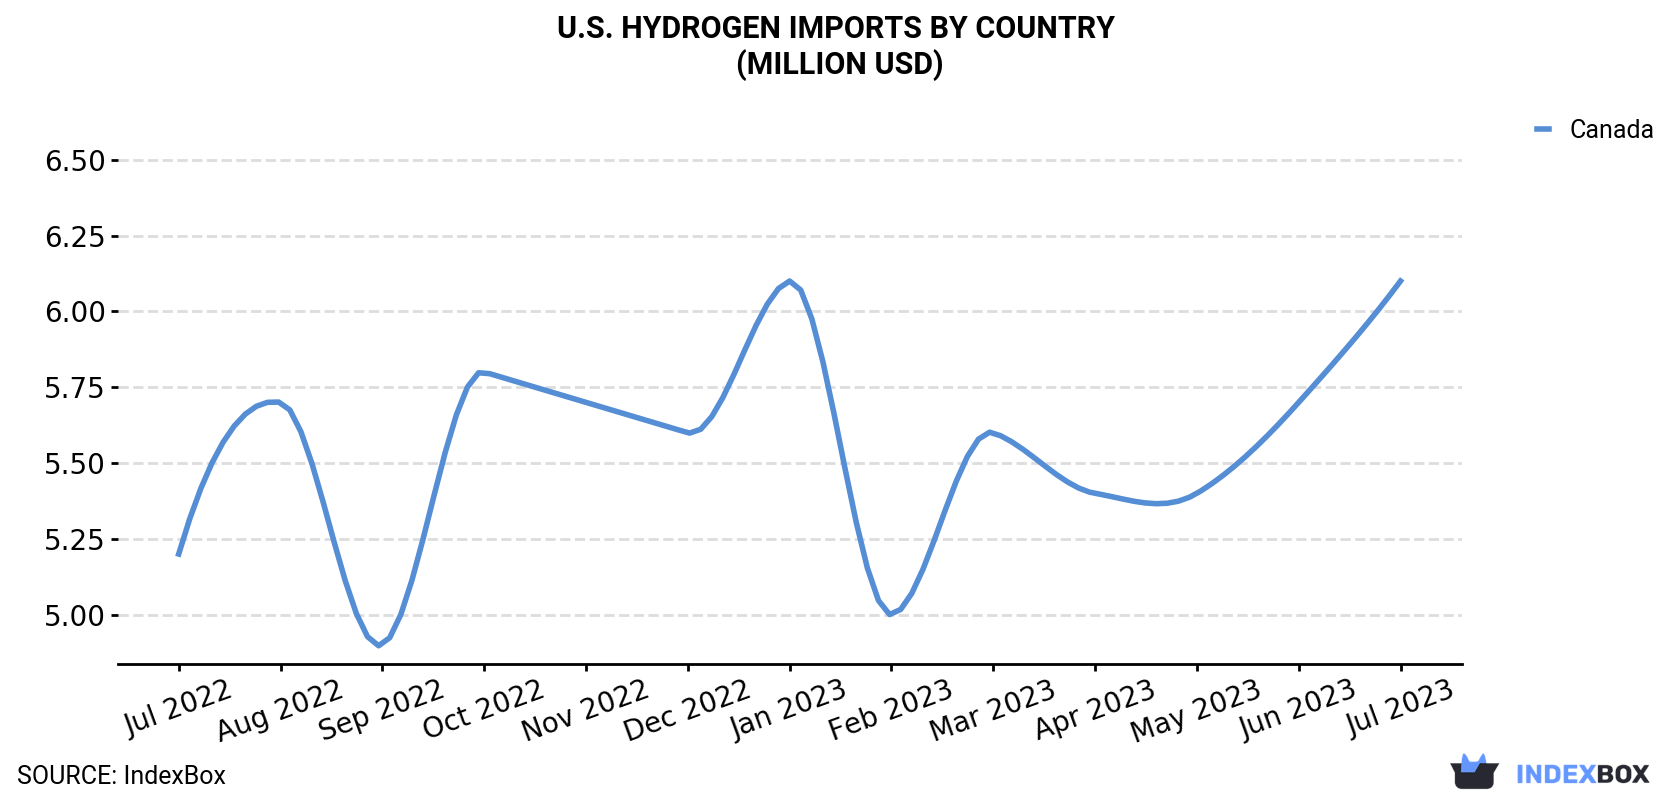 U.S. Hydrogen Imports By Country (Million USD)